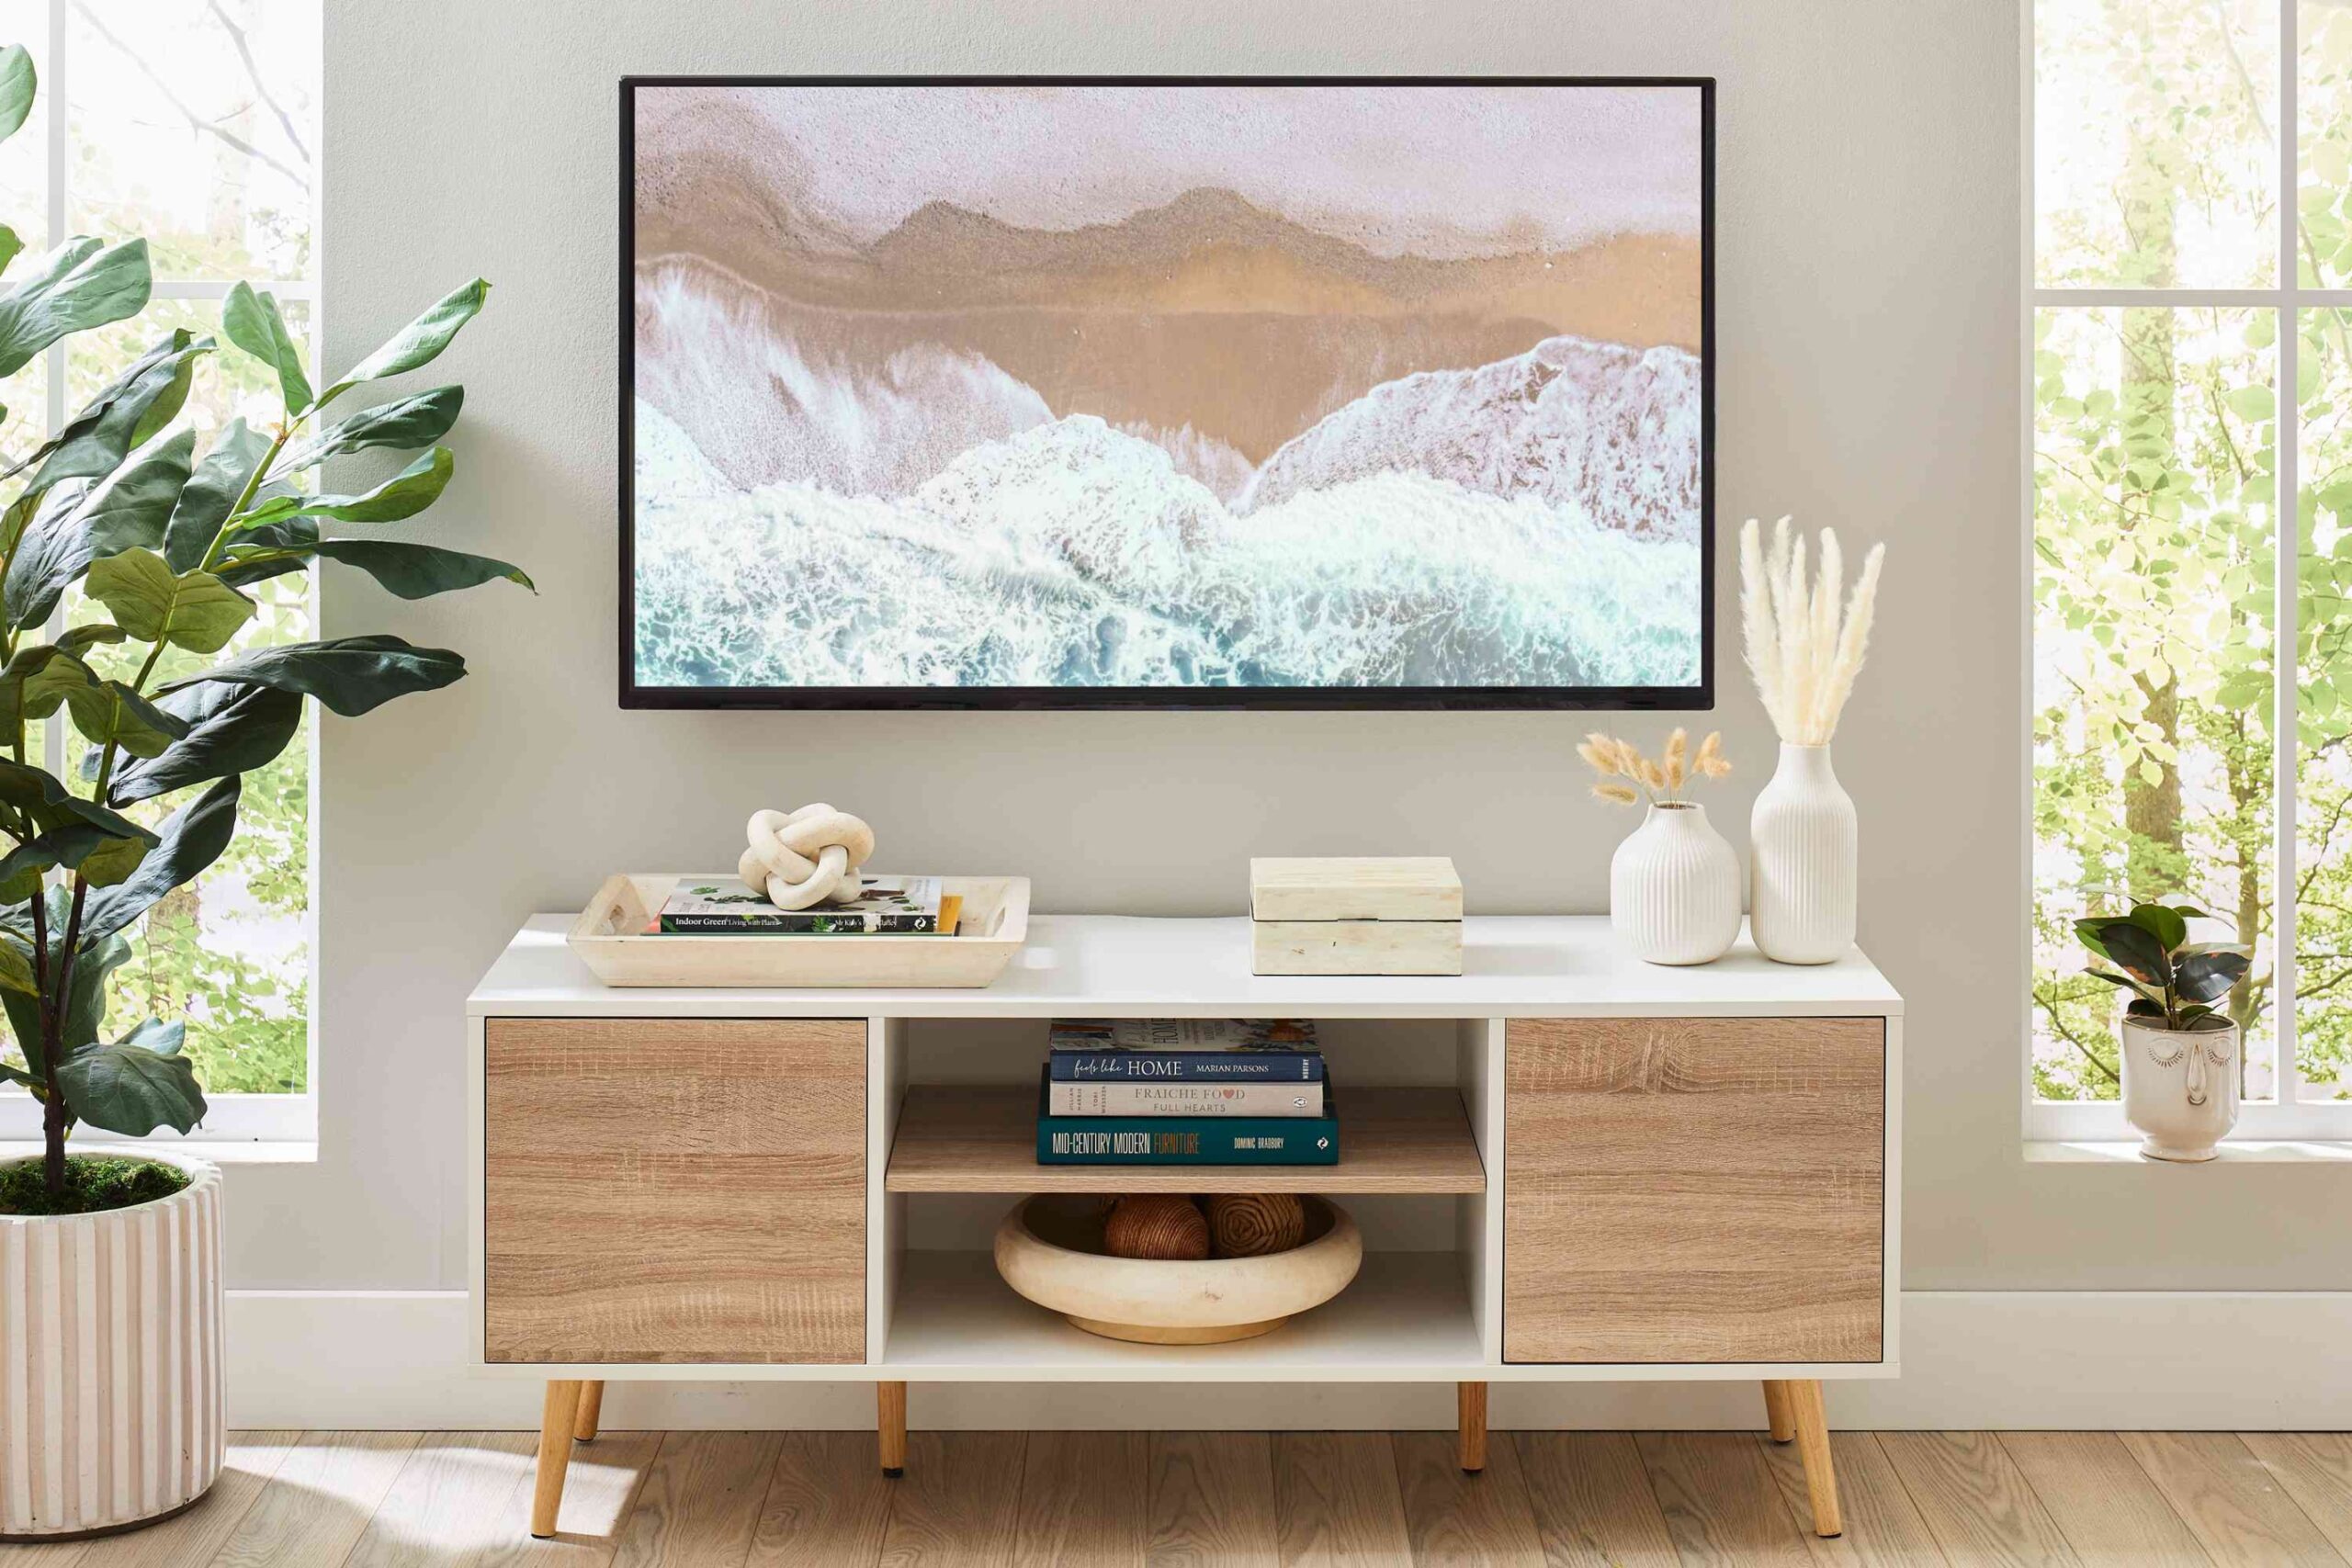 t.v wall decoration Niche Utama Home  Ideas for Decorating Around a TV That Will Help It Blend In